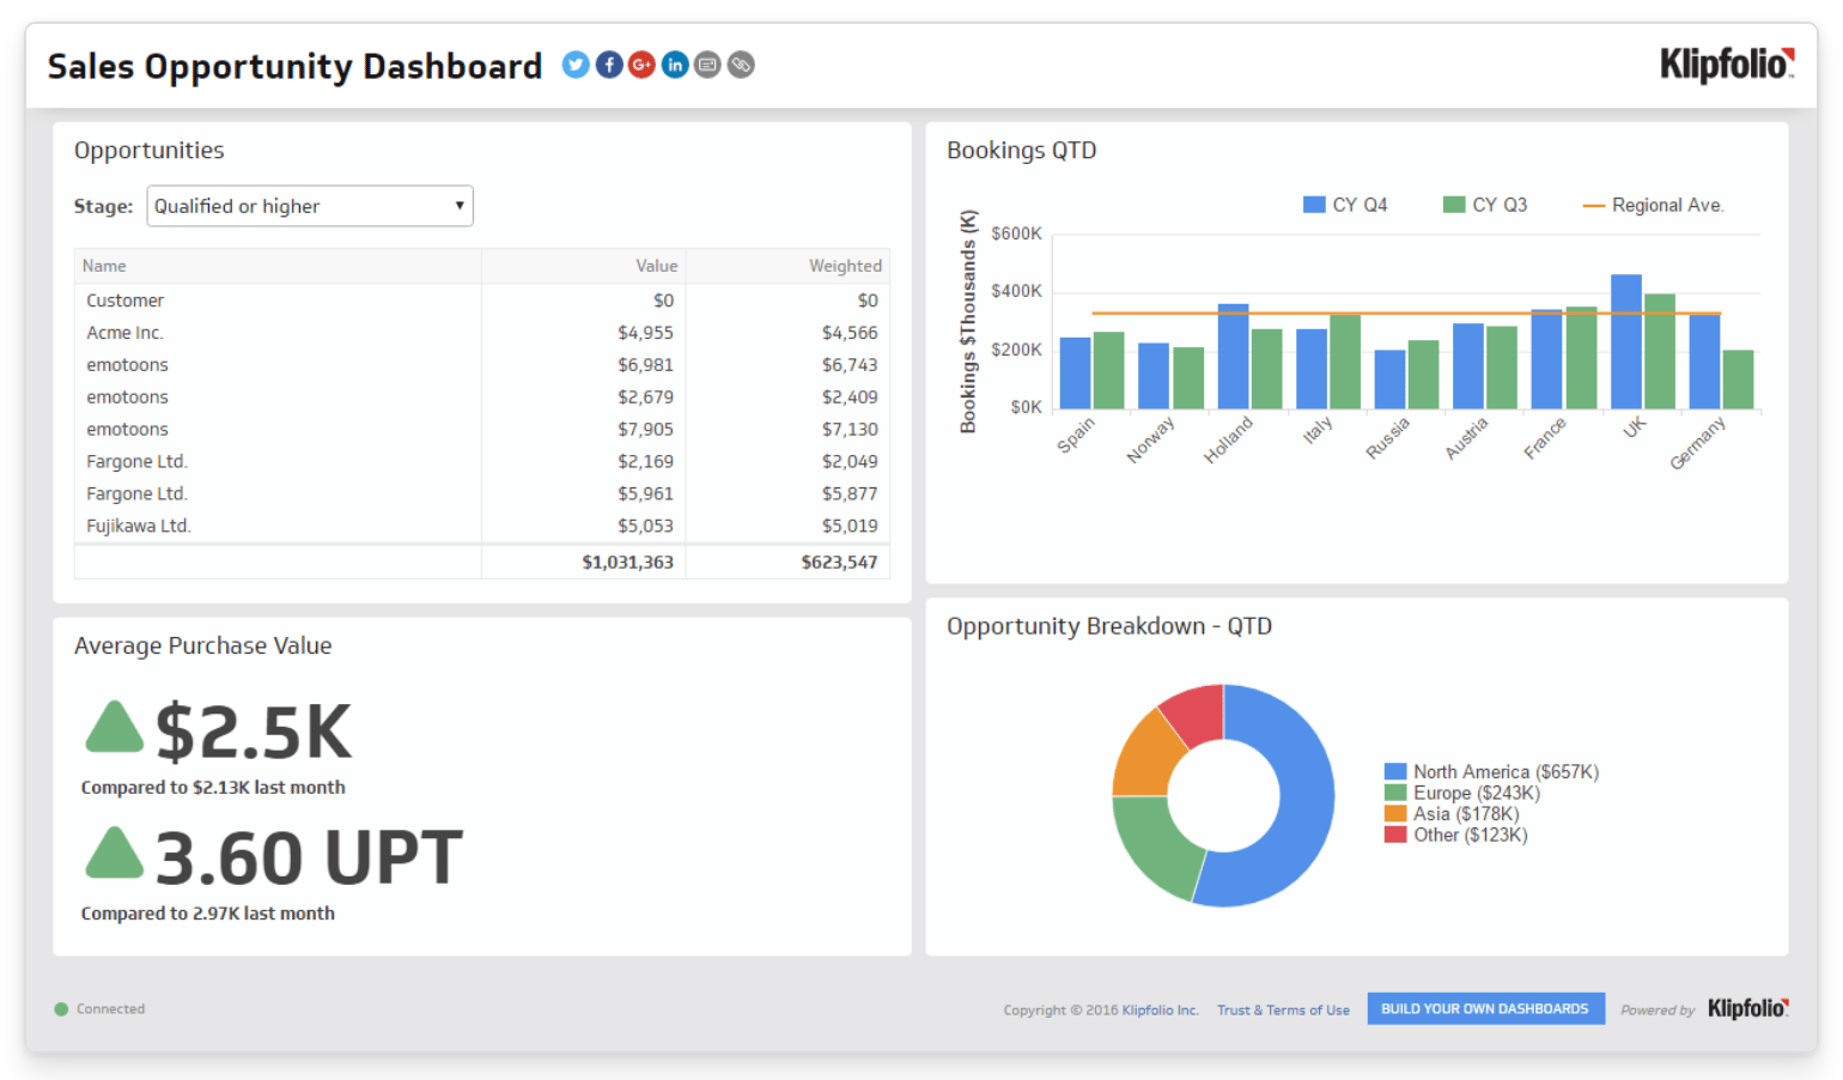 Sales Opportunity Dashboard